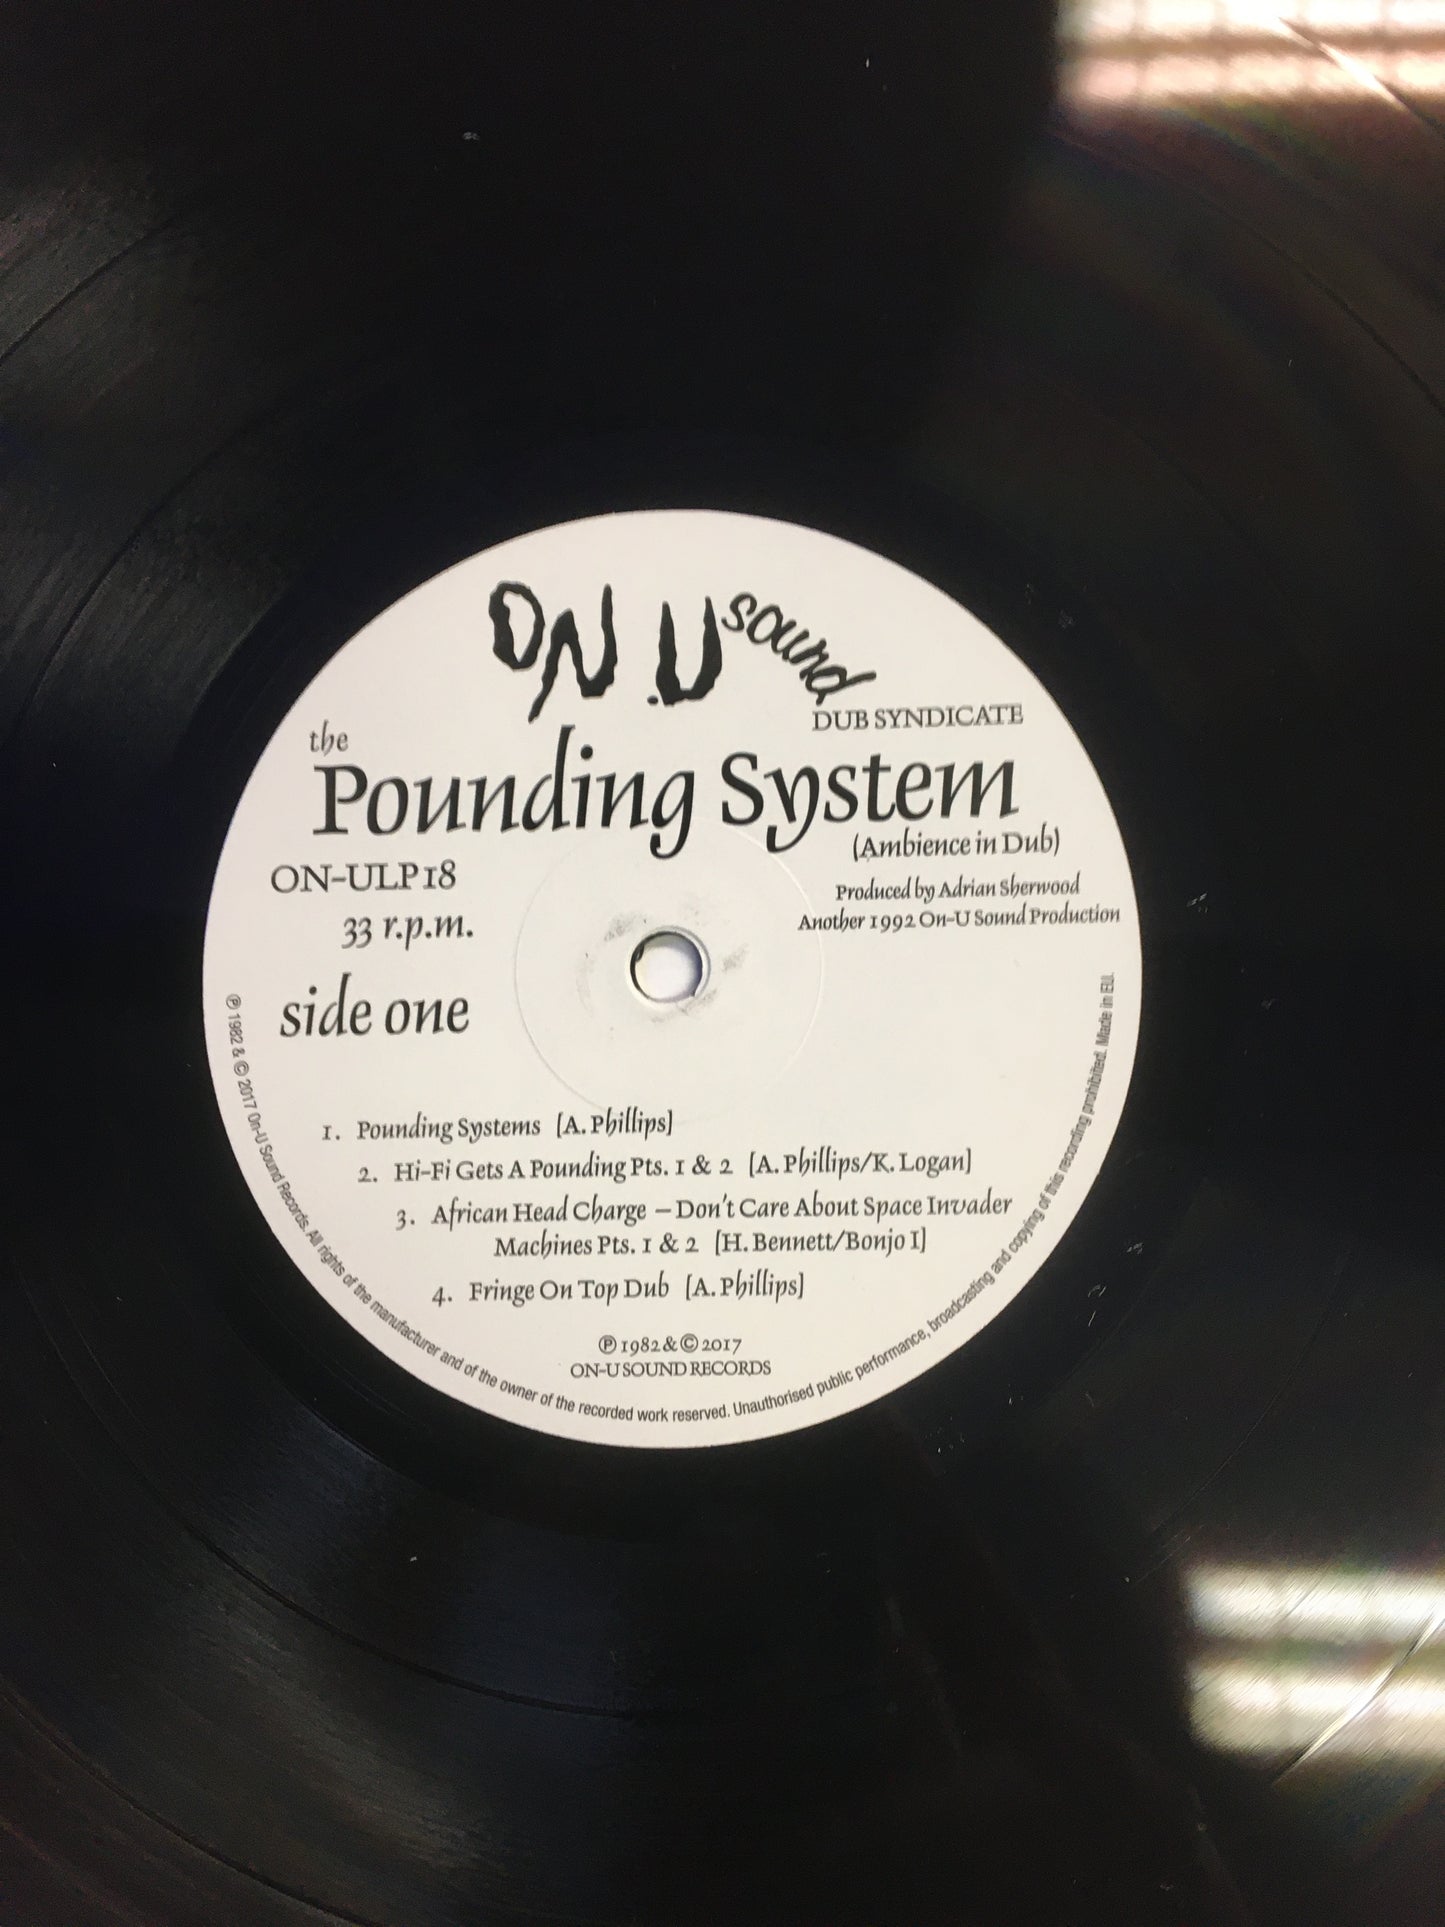 The DUB SYNDICATE LP The POUNDING SYSTEM